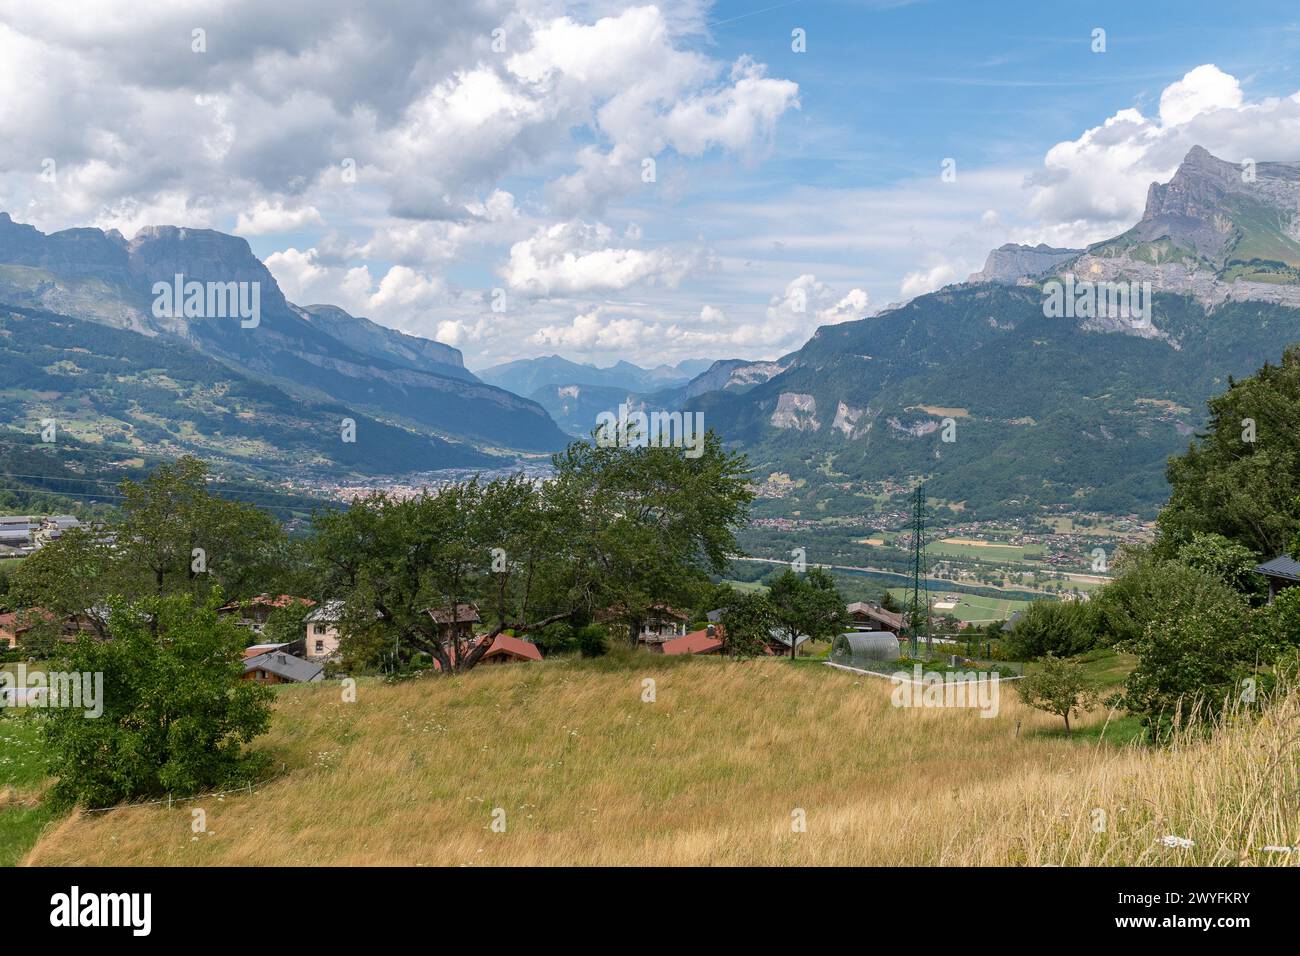 Elevated view of the Arve Valley in the French Haute-Savoie department, formed by the upper reaches of the river Arve, Auvergne Rhone Alpes, France Stock Photo